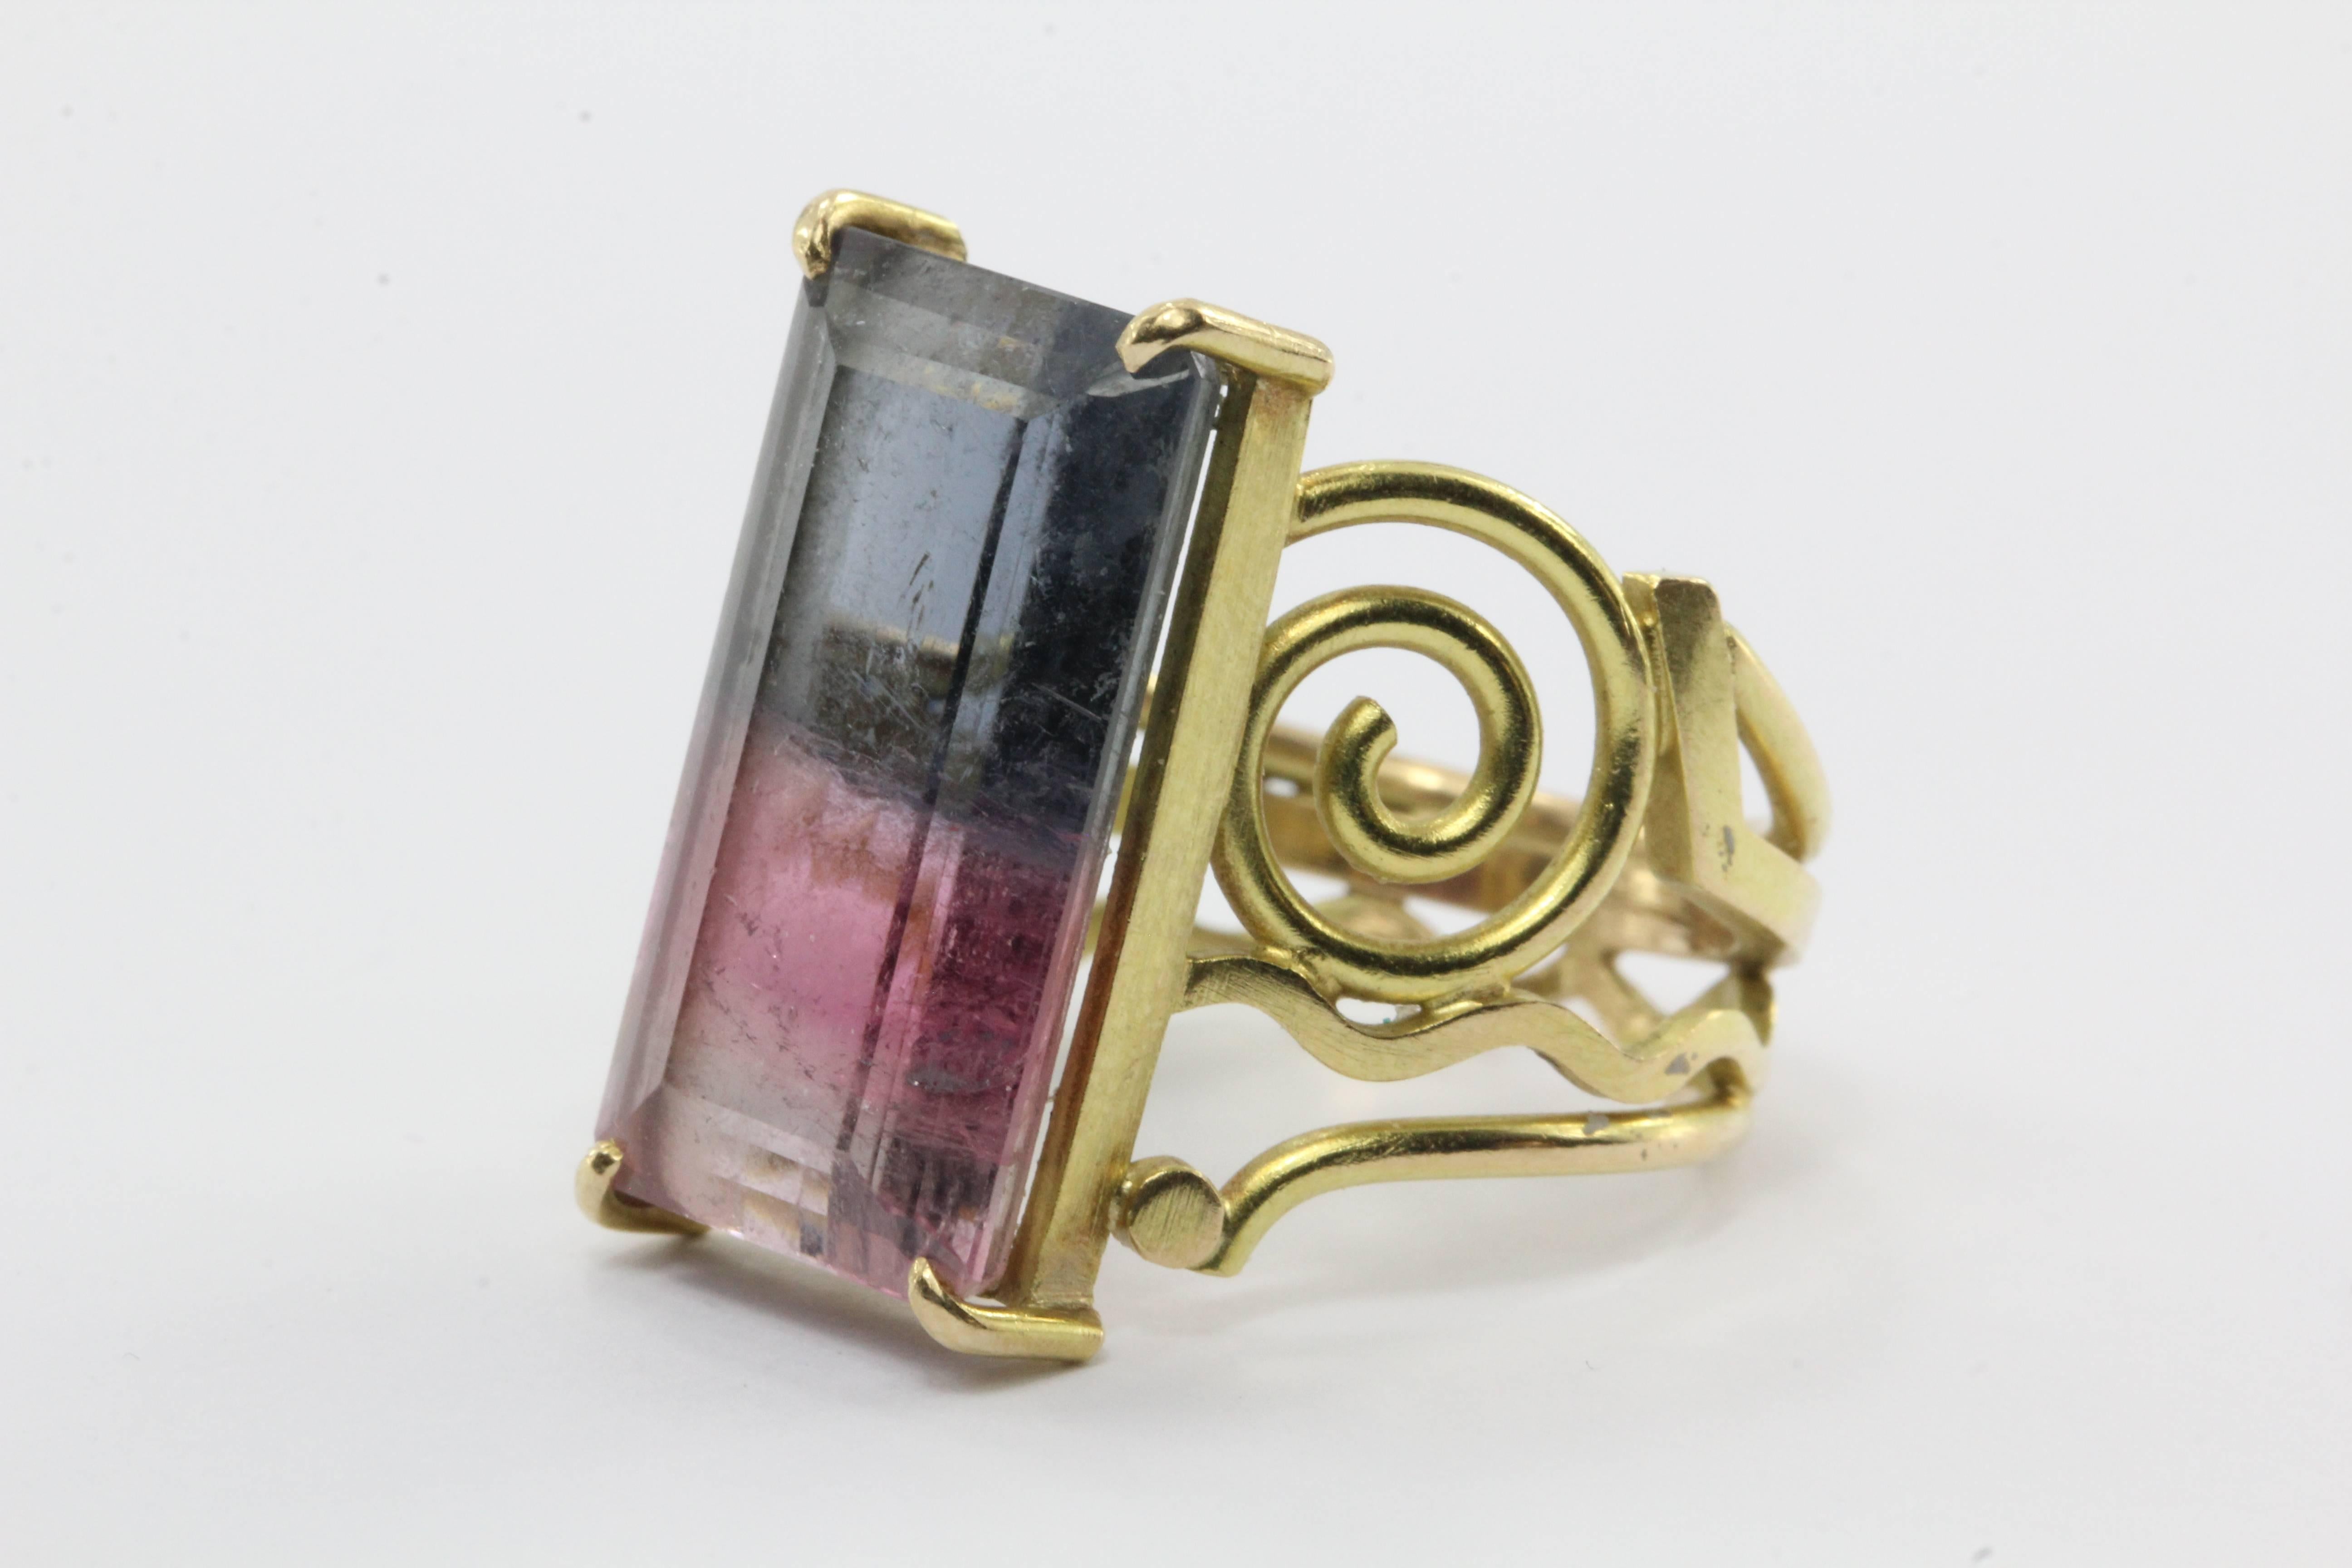 14K Gold Large Post Modern Memphis PoMo Pink & Purple Watermelon Tourmaline Ring. The ring is in great used estate condition and ready to wear. It has a few small chips to the stone though. The tourmaline is half pink and half purple. The piece